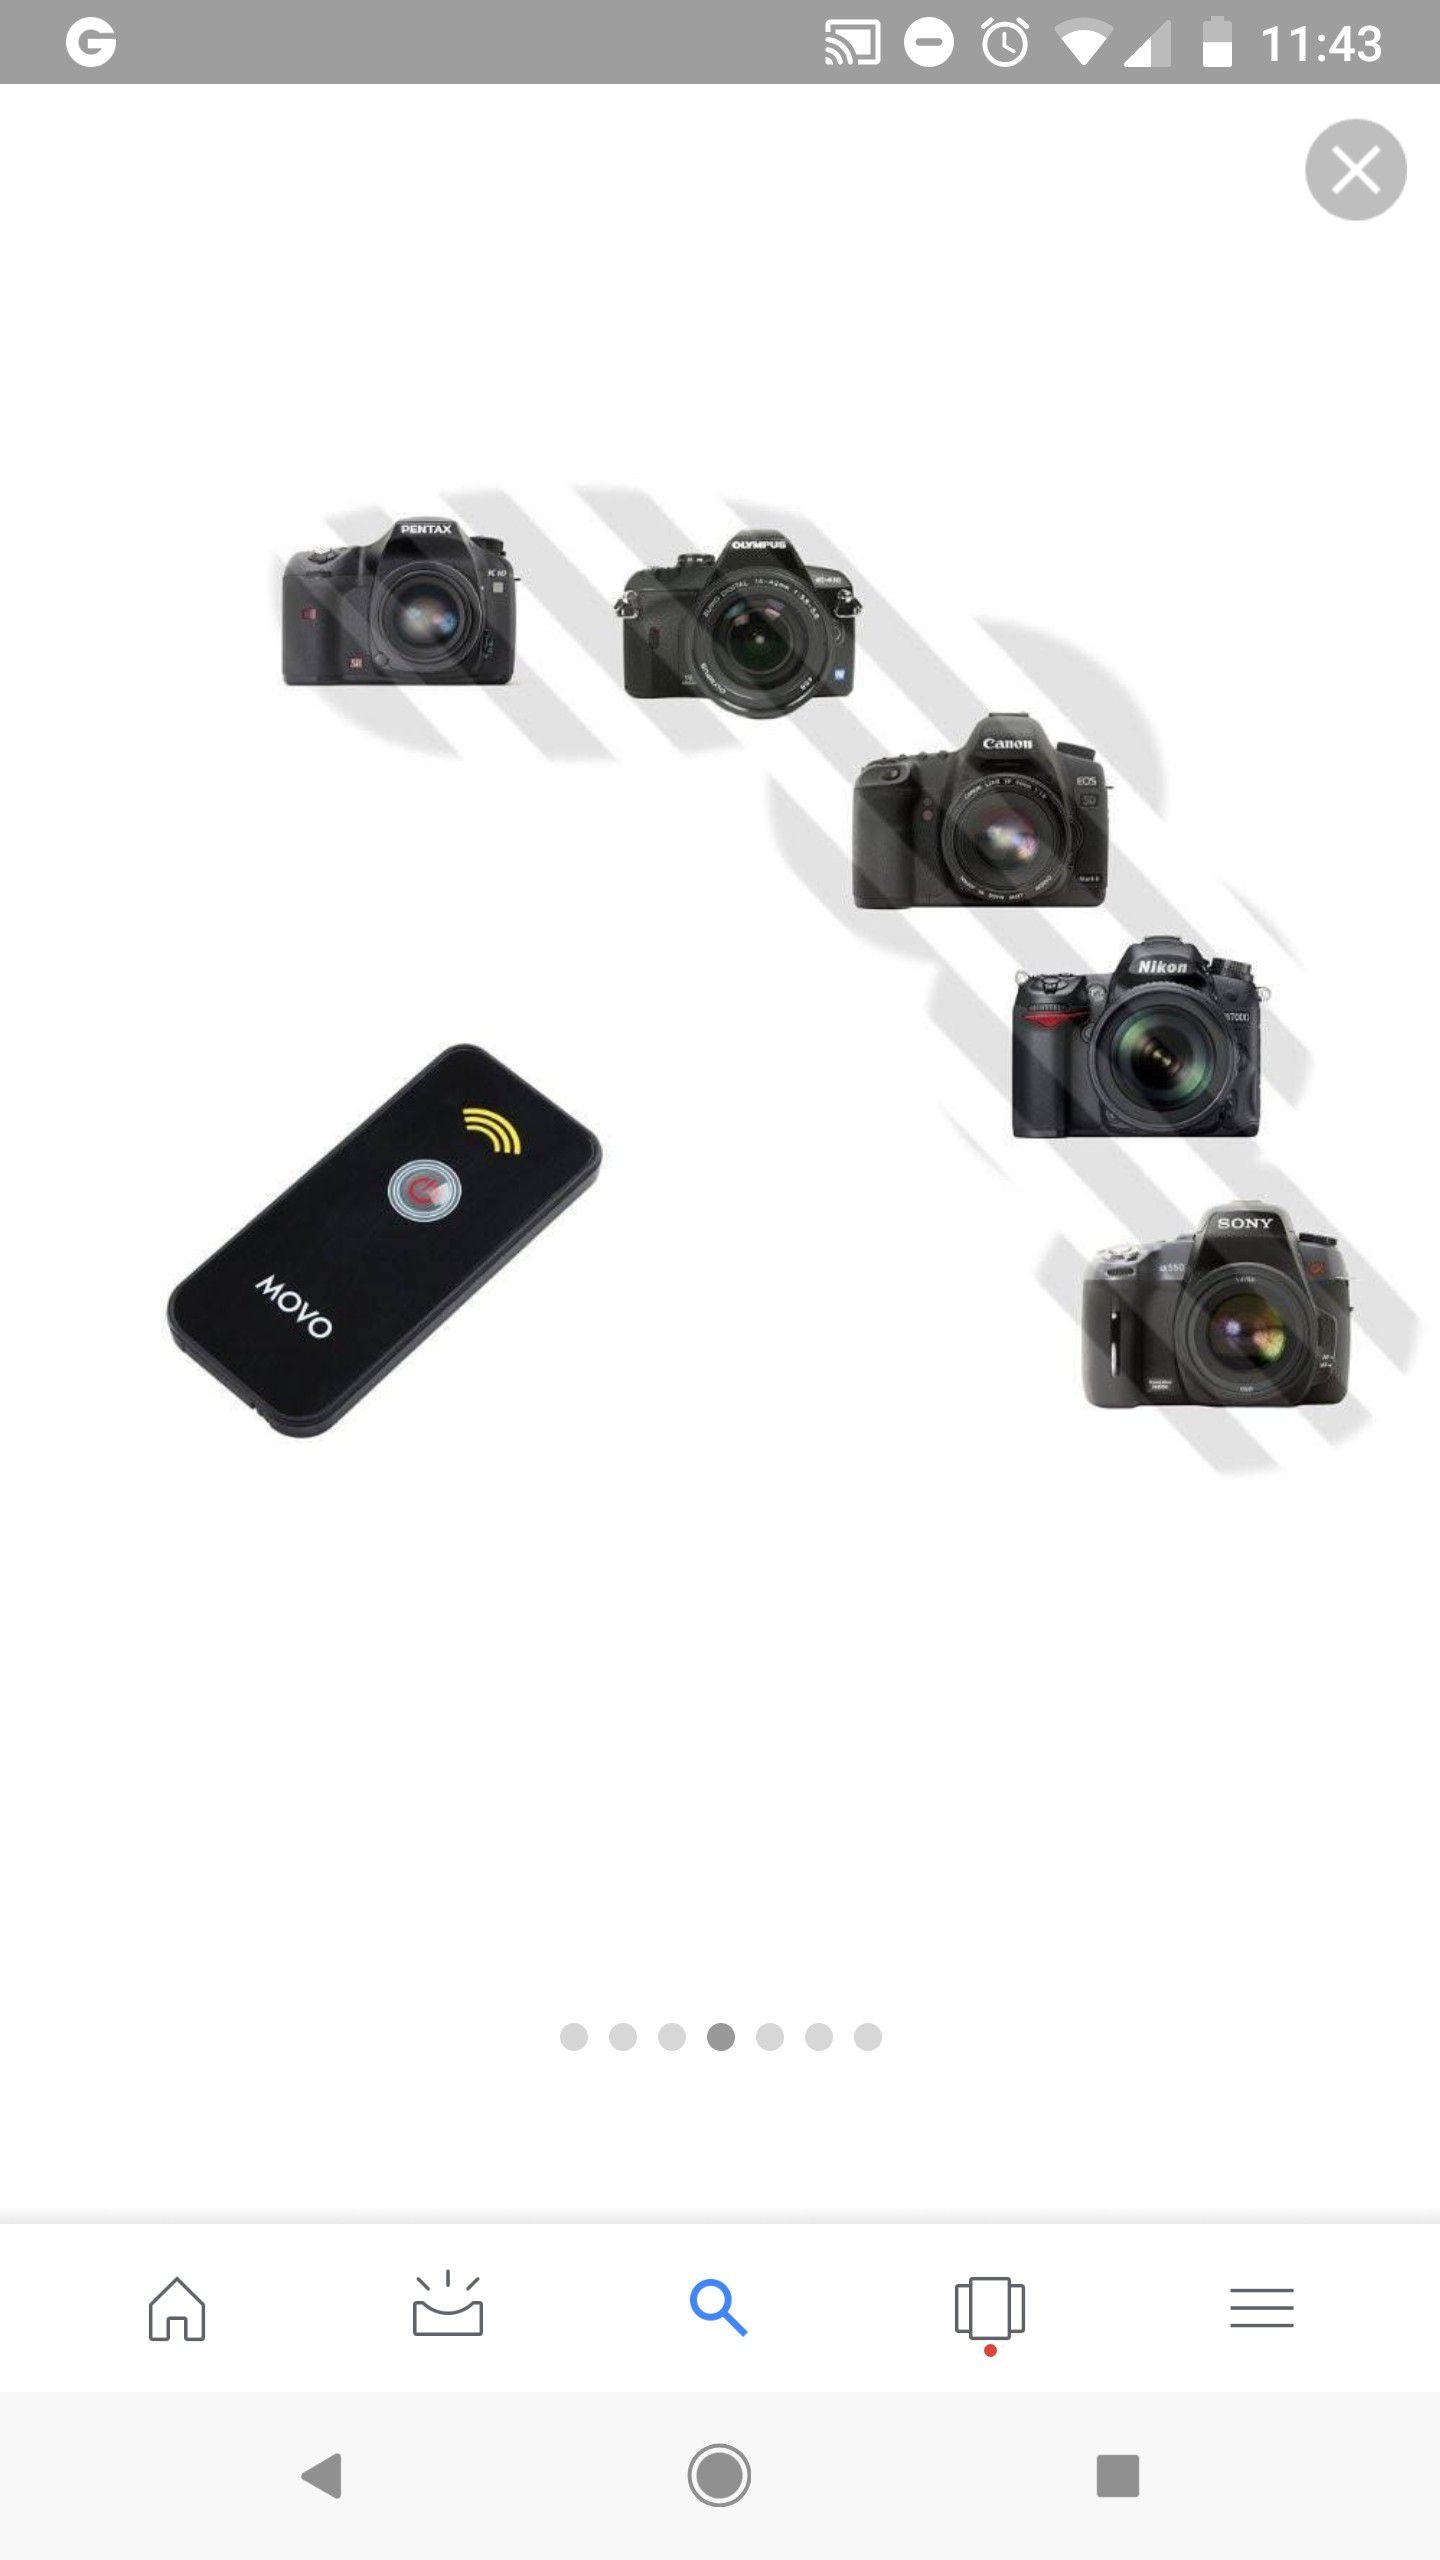 Movo Photo Universal IR Remote Control Shutter Release for Canon EOS Nikon Sony Alpha Olympus & Pentax DSLR Cameras